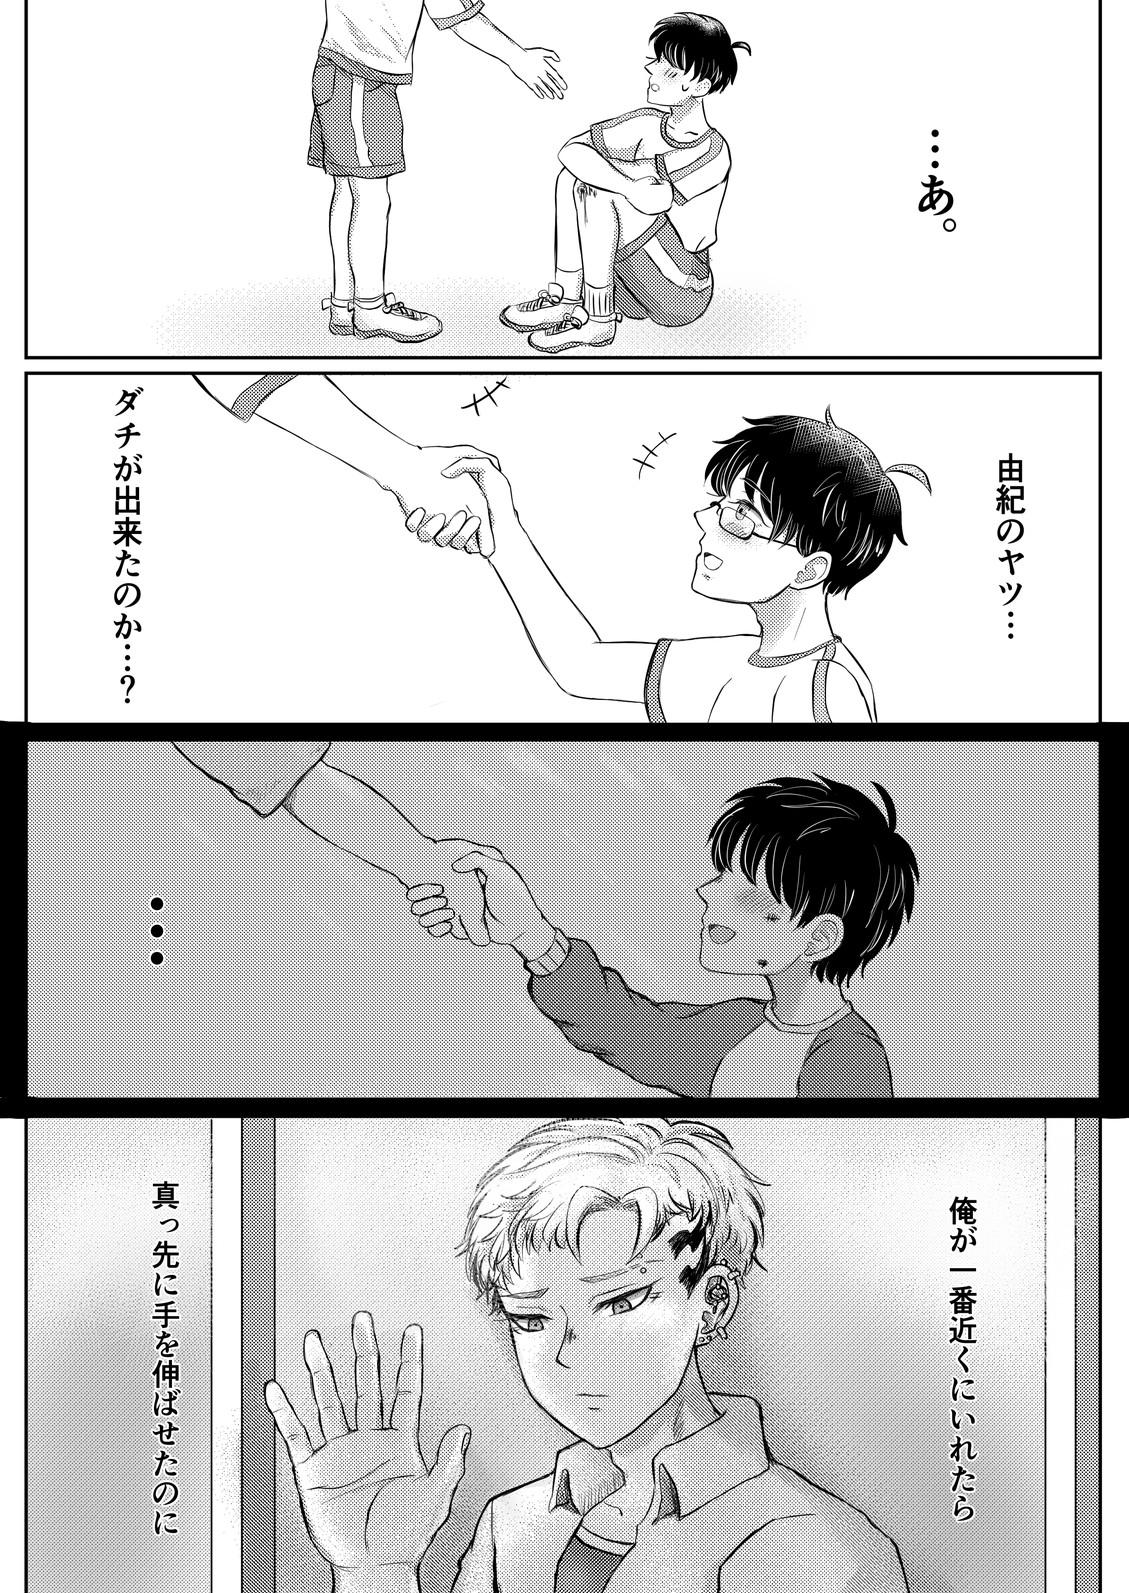 Doggy 龍馬君の特等席 Infiel - Page 7